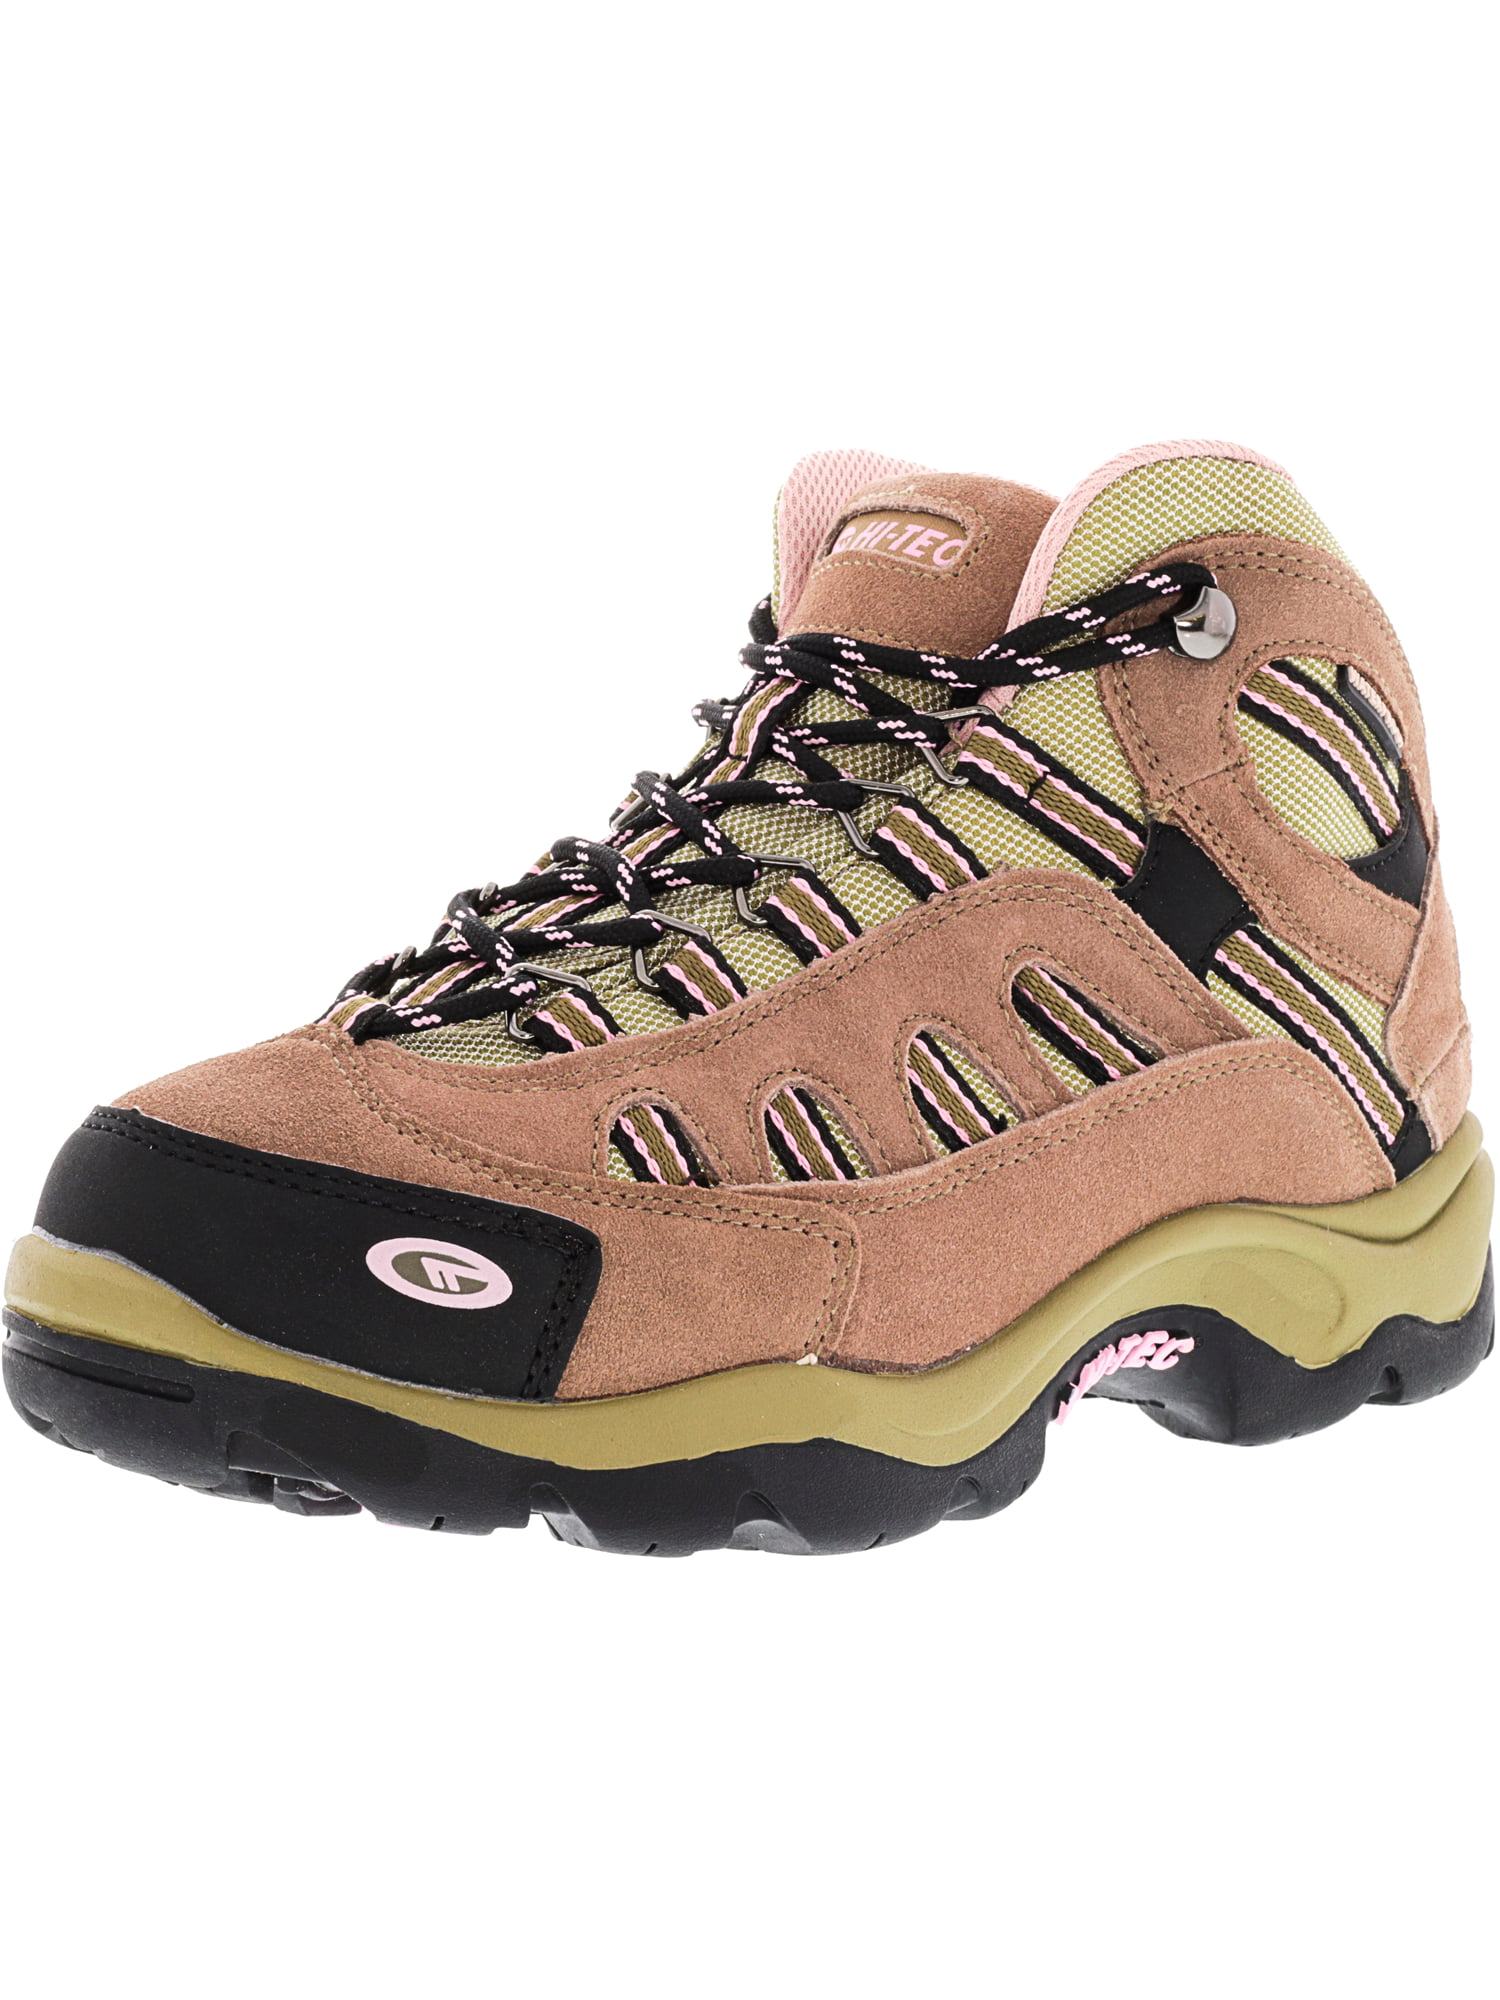 hiking boot brands